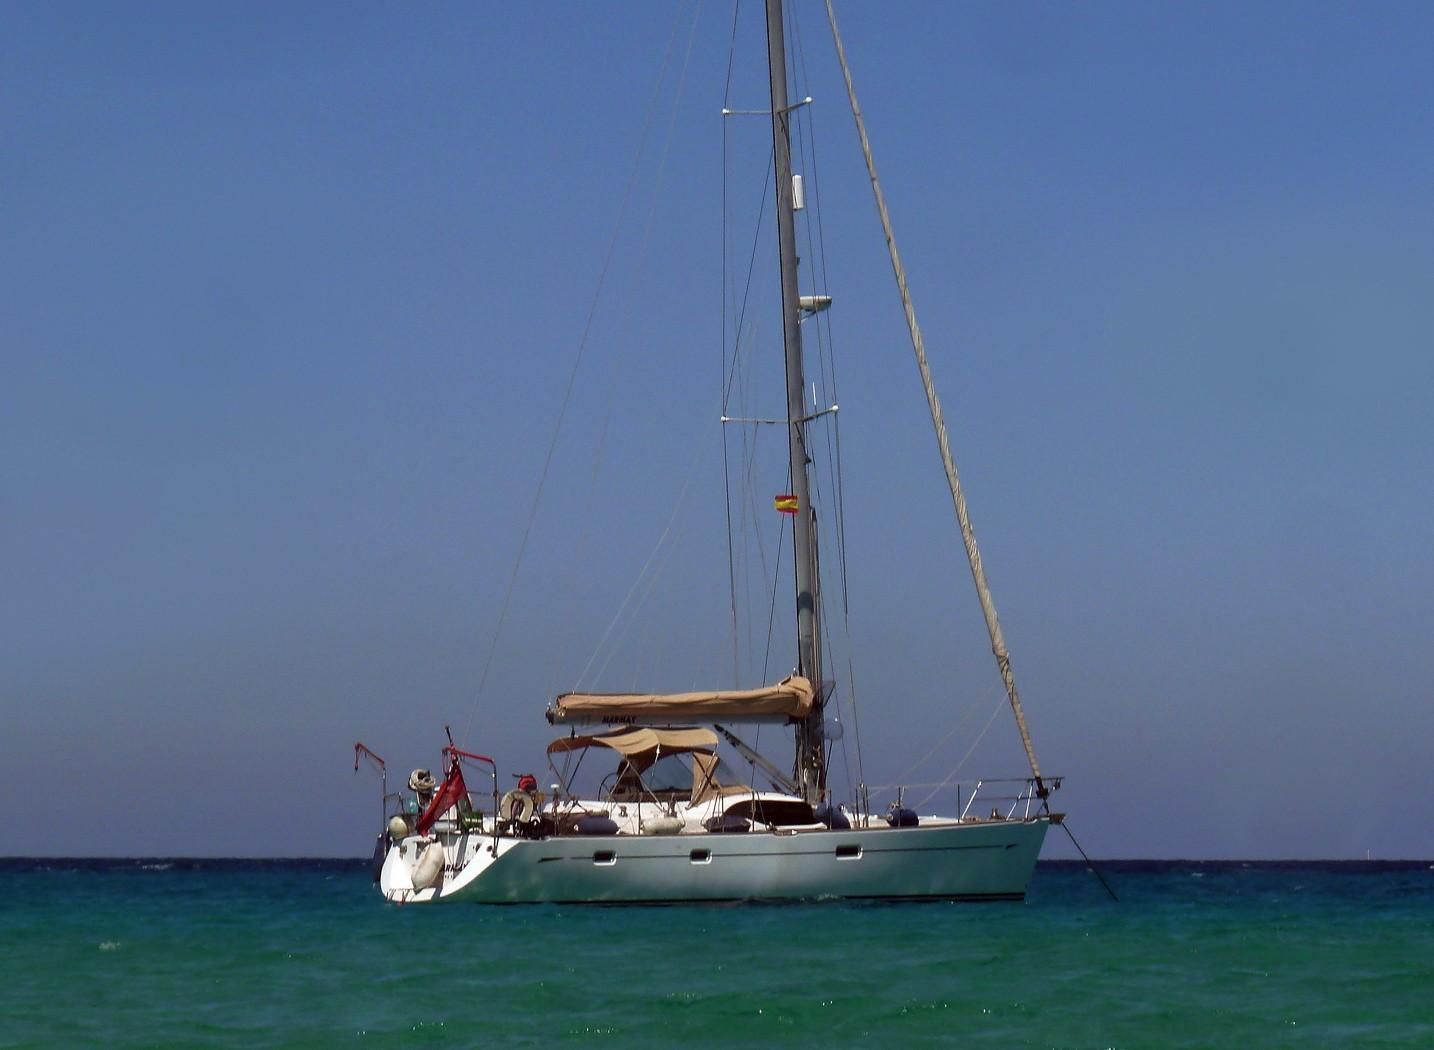 2008 Oyster 46 Sail Boat For Sale - www.yachtworld.com